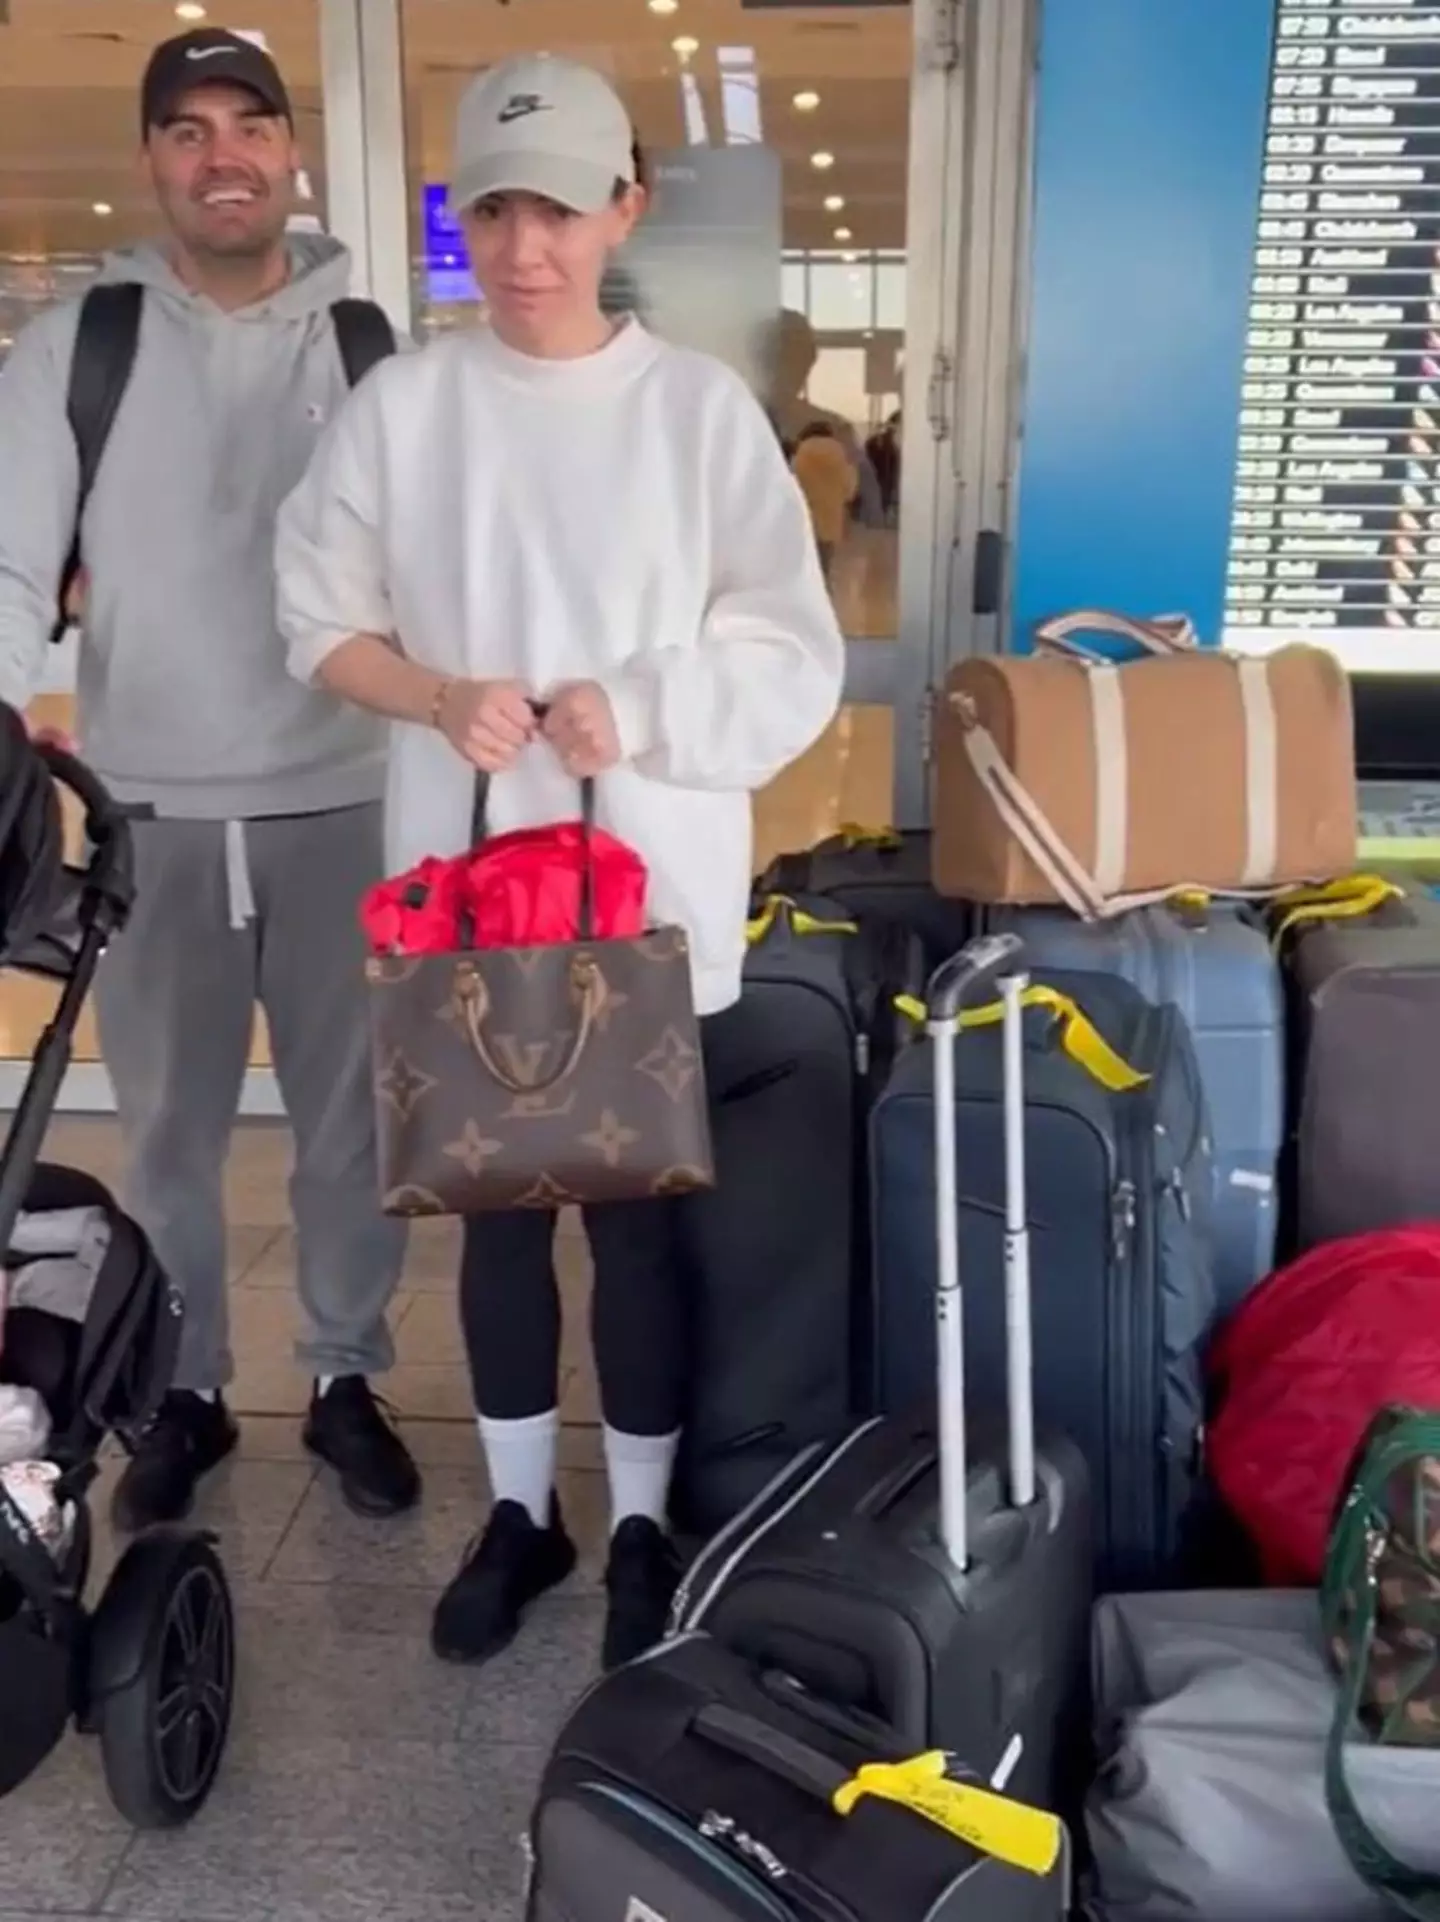 The family travelled with 18 pieces of luggage.